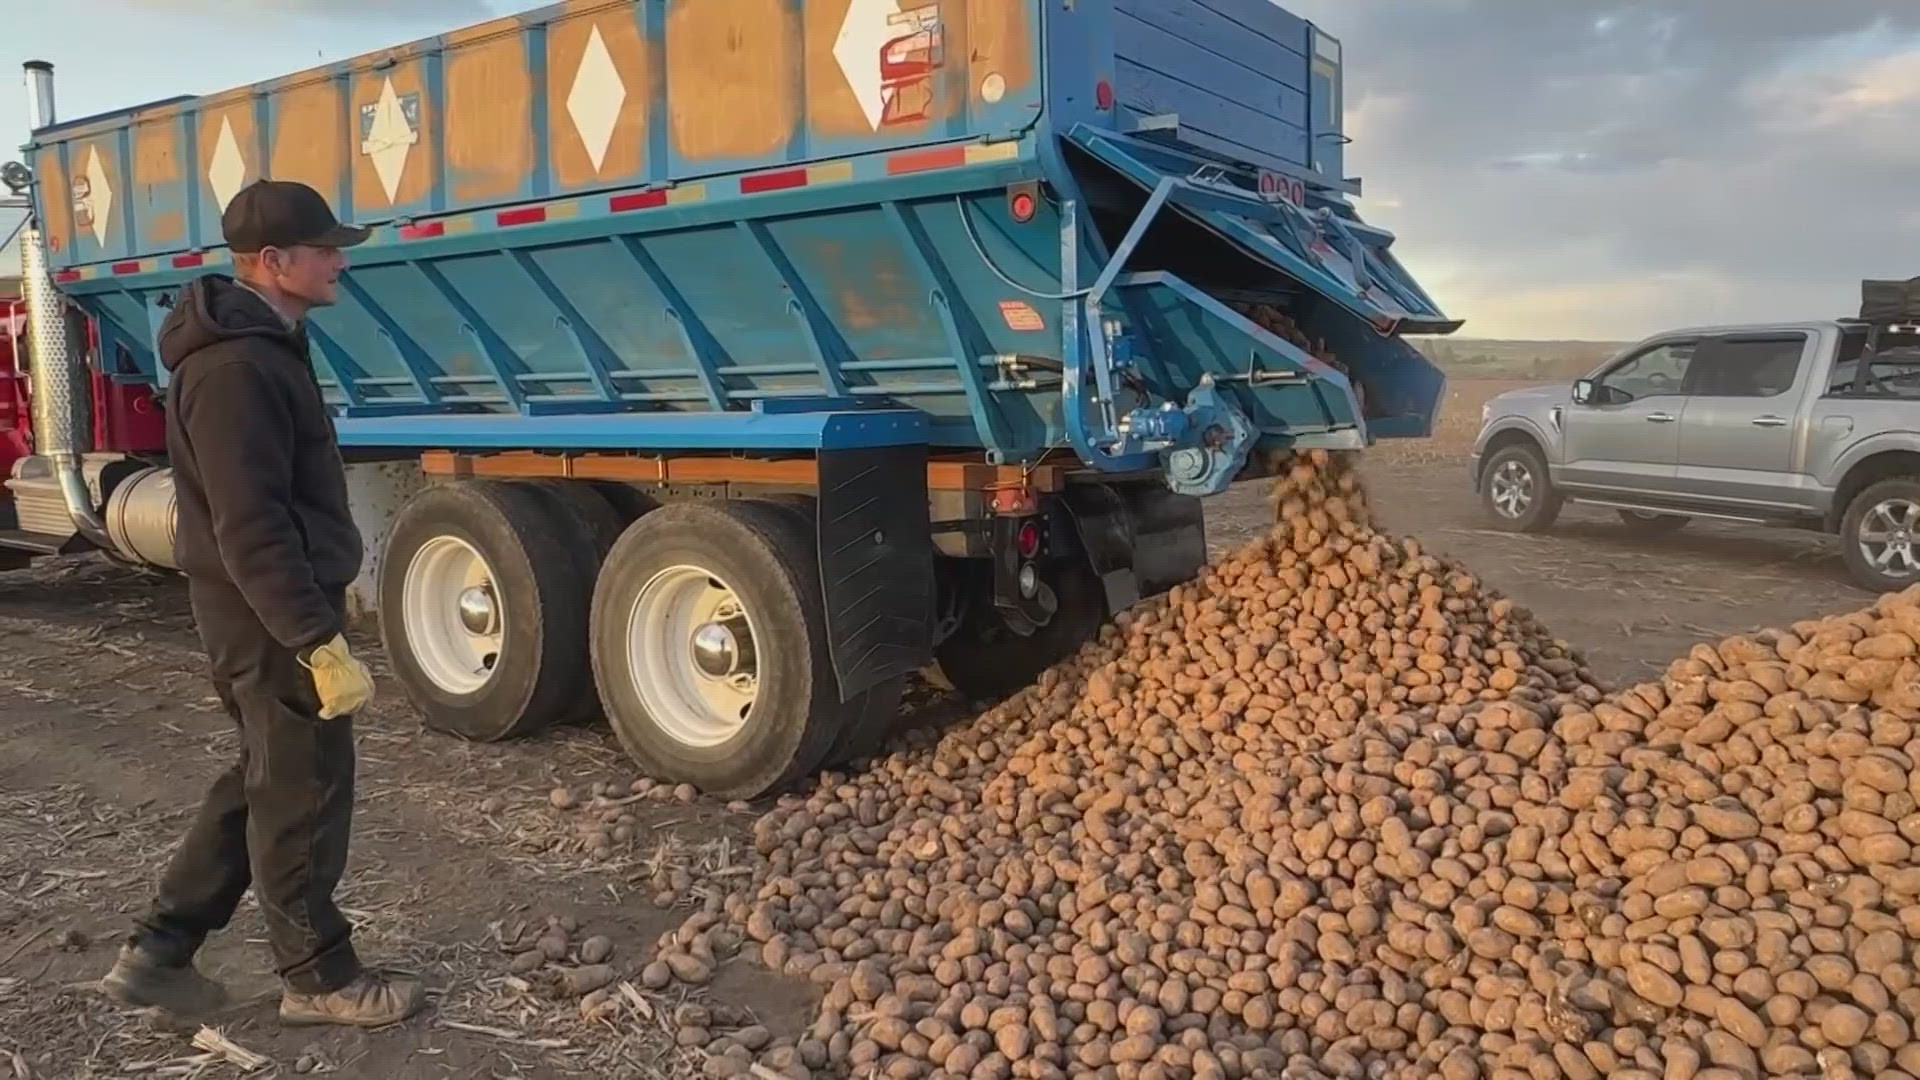 The Spokane Hutterite Brethren colony is sharing 250 tons of free potatoes with their neighbors for free.